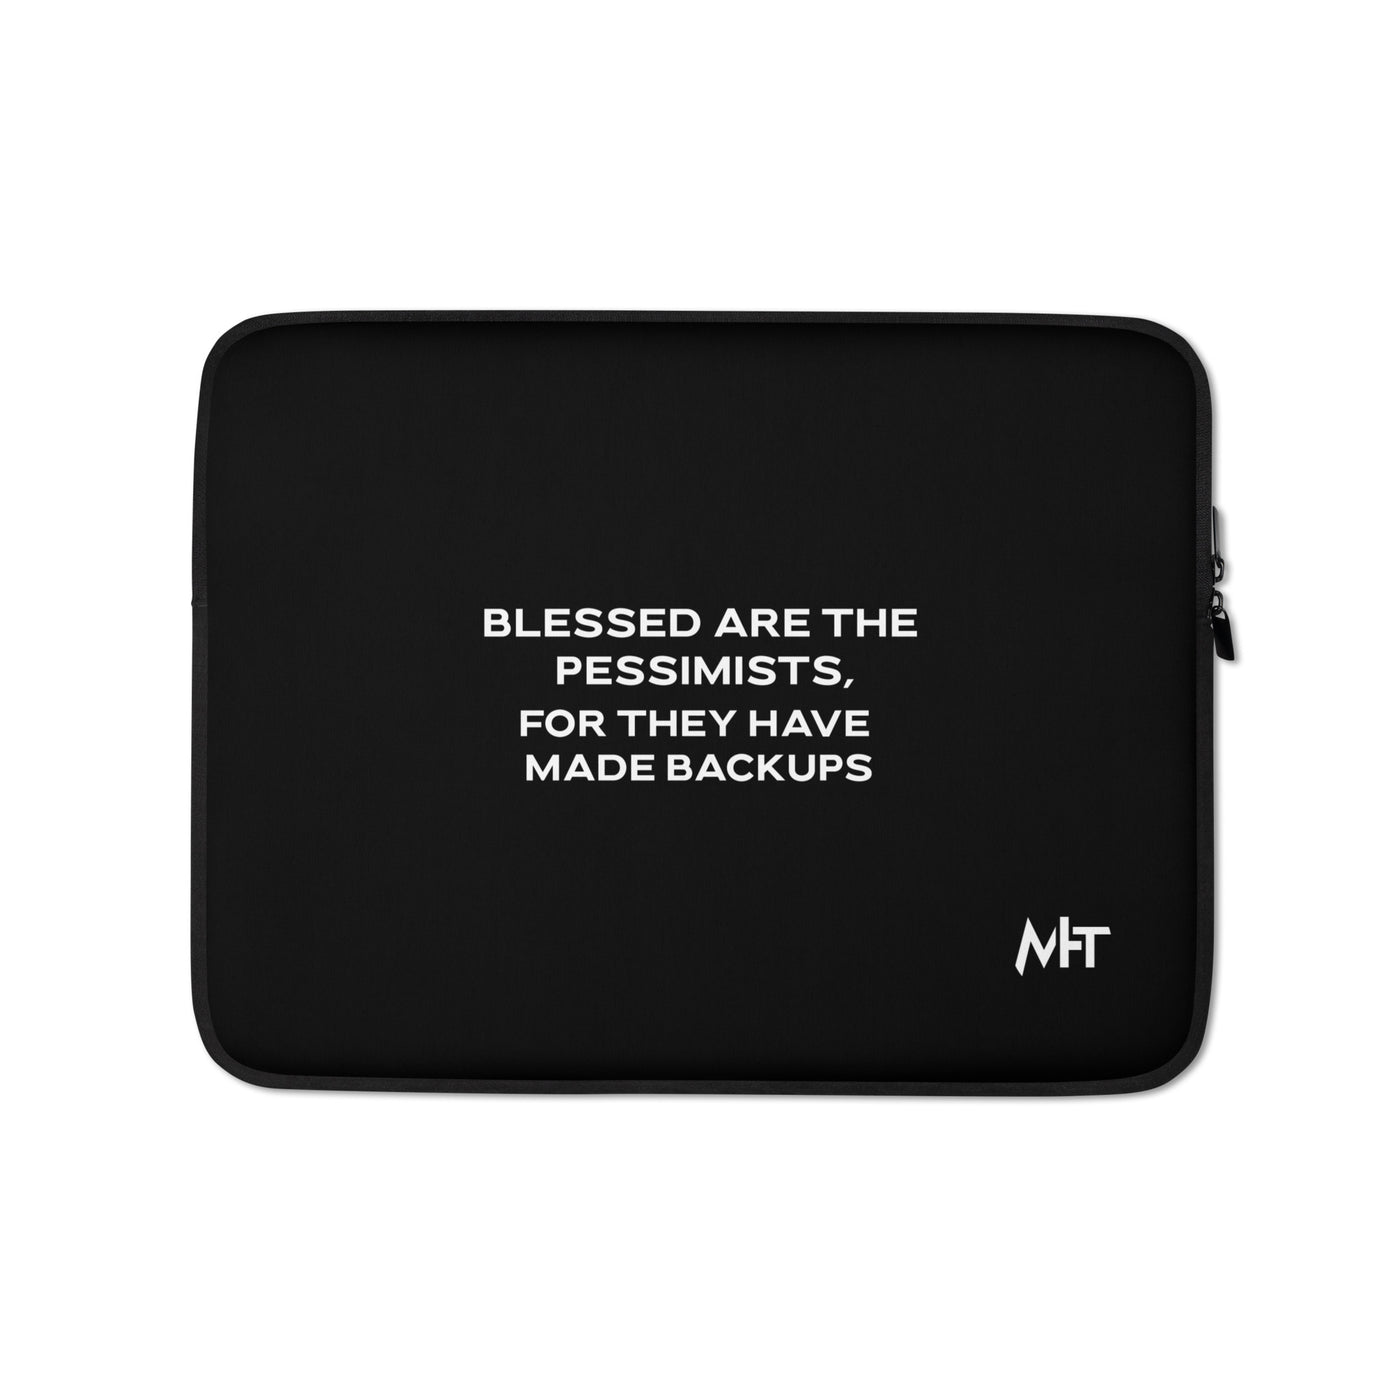 Blessed are the pessimists for they have made backups V2 - Laptop Sleeve